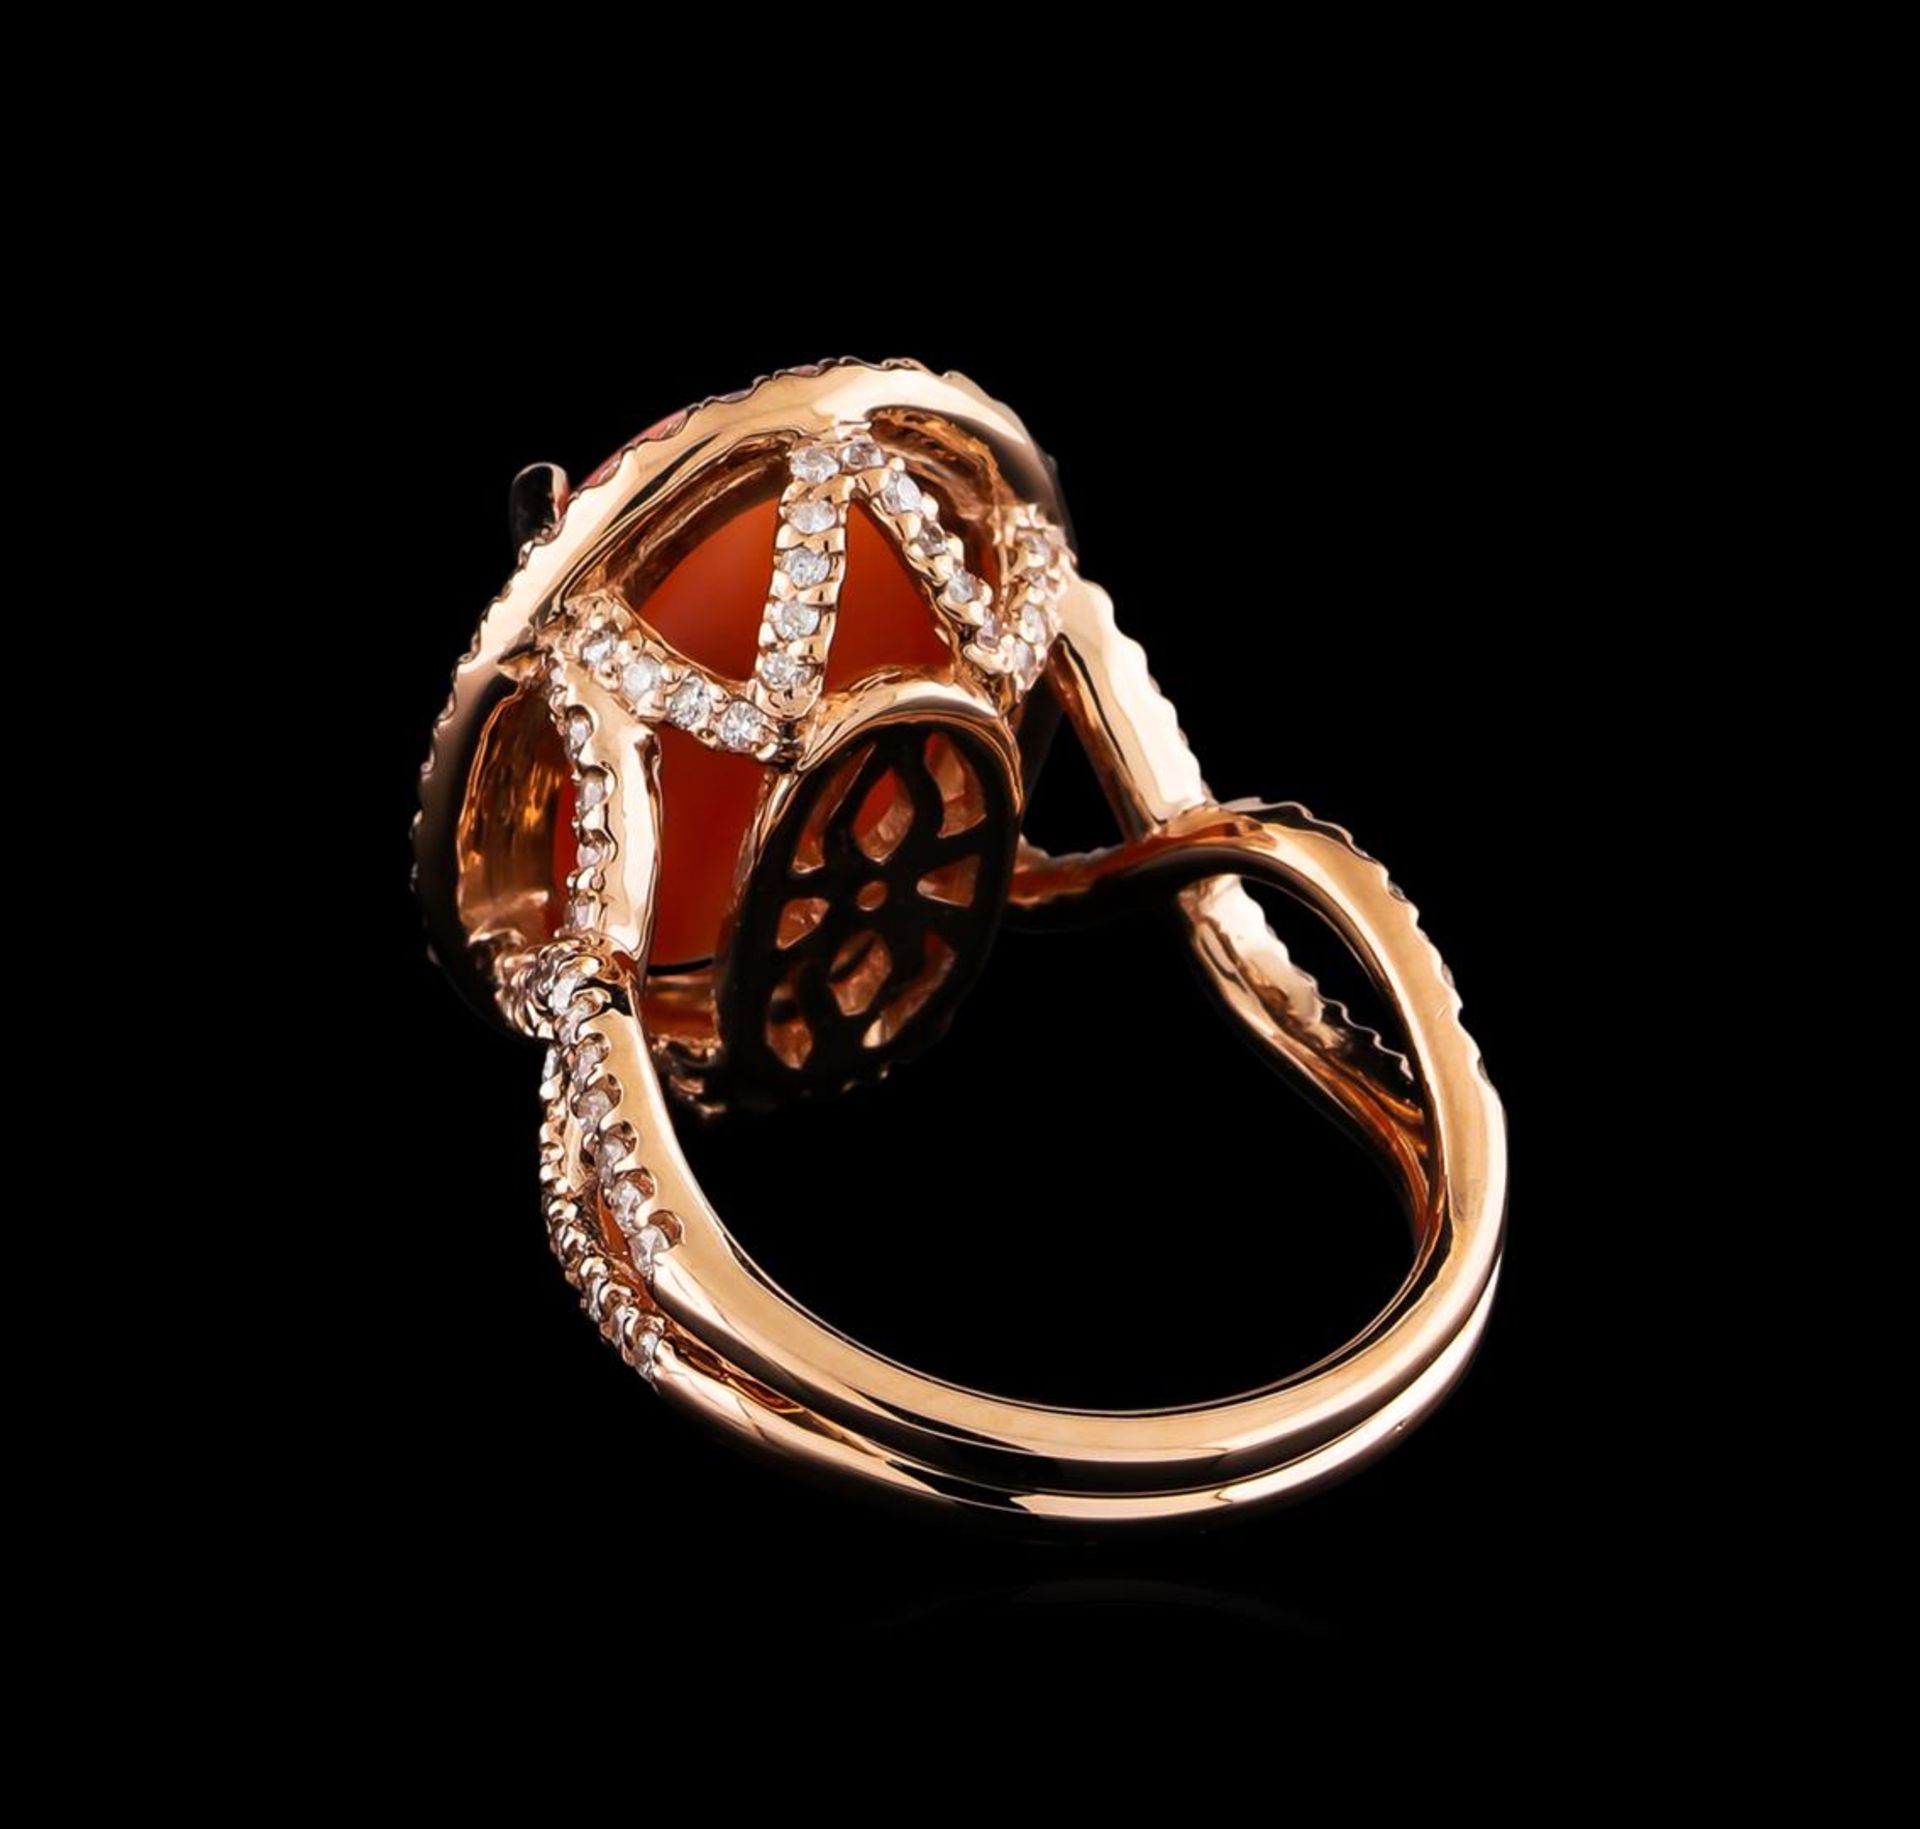 6.62 ctw Coral and Diamond Ring - 14KT Rose Gold - Image 3 of 5